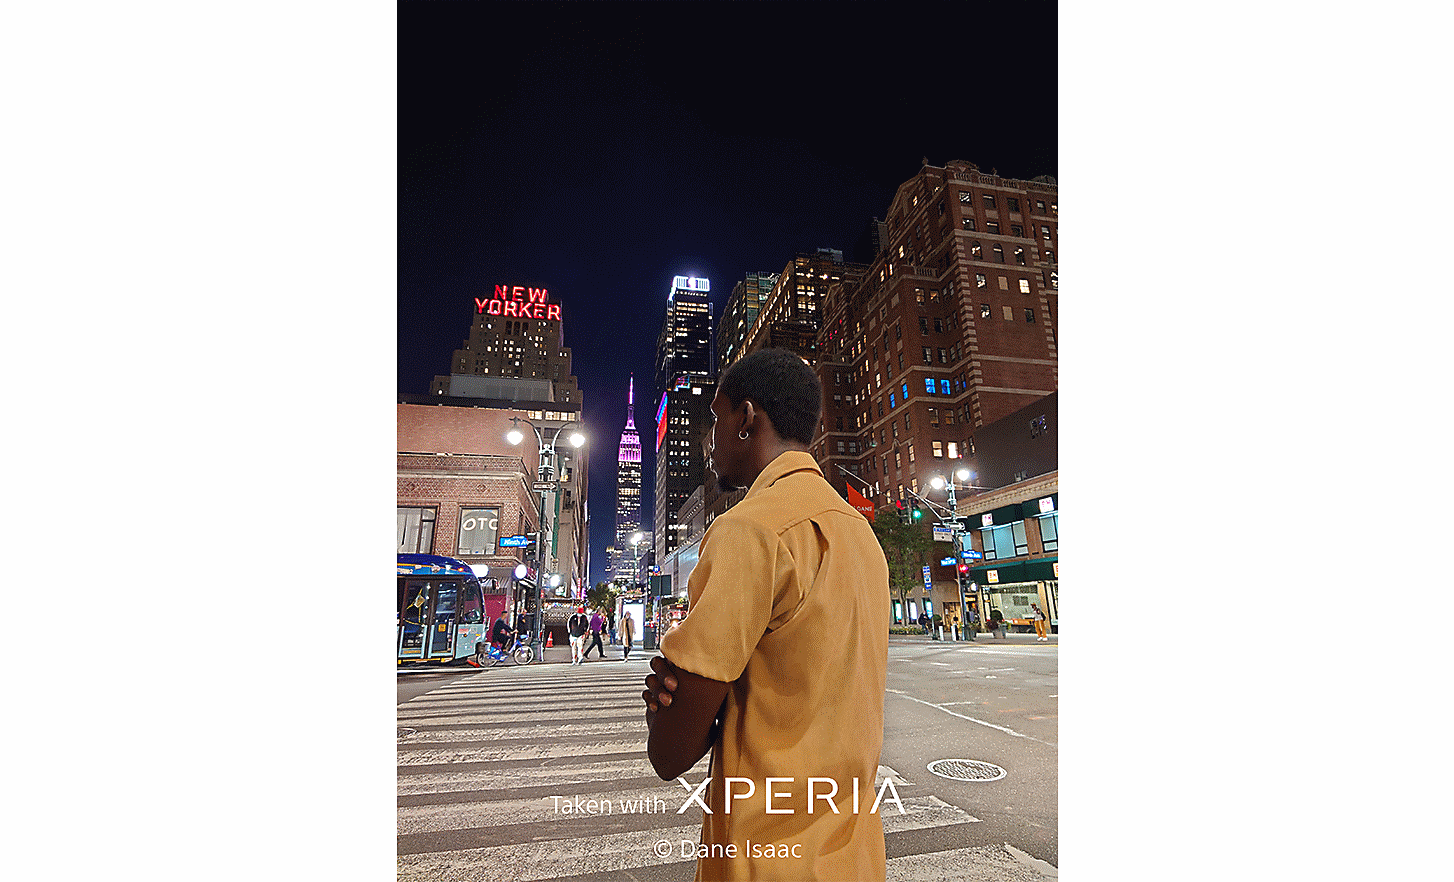 City streets at night with a man in the foreground. Text reads "Taken with XPERIA ©Dane Isaac".